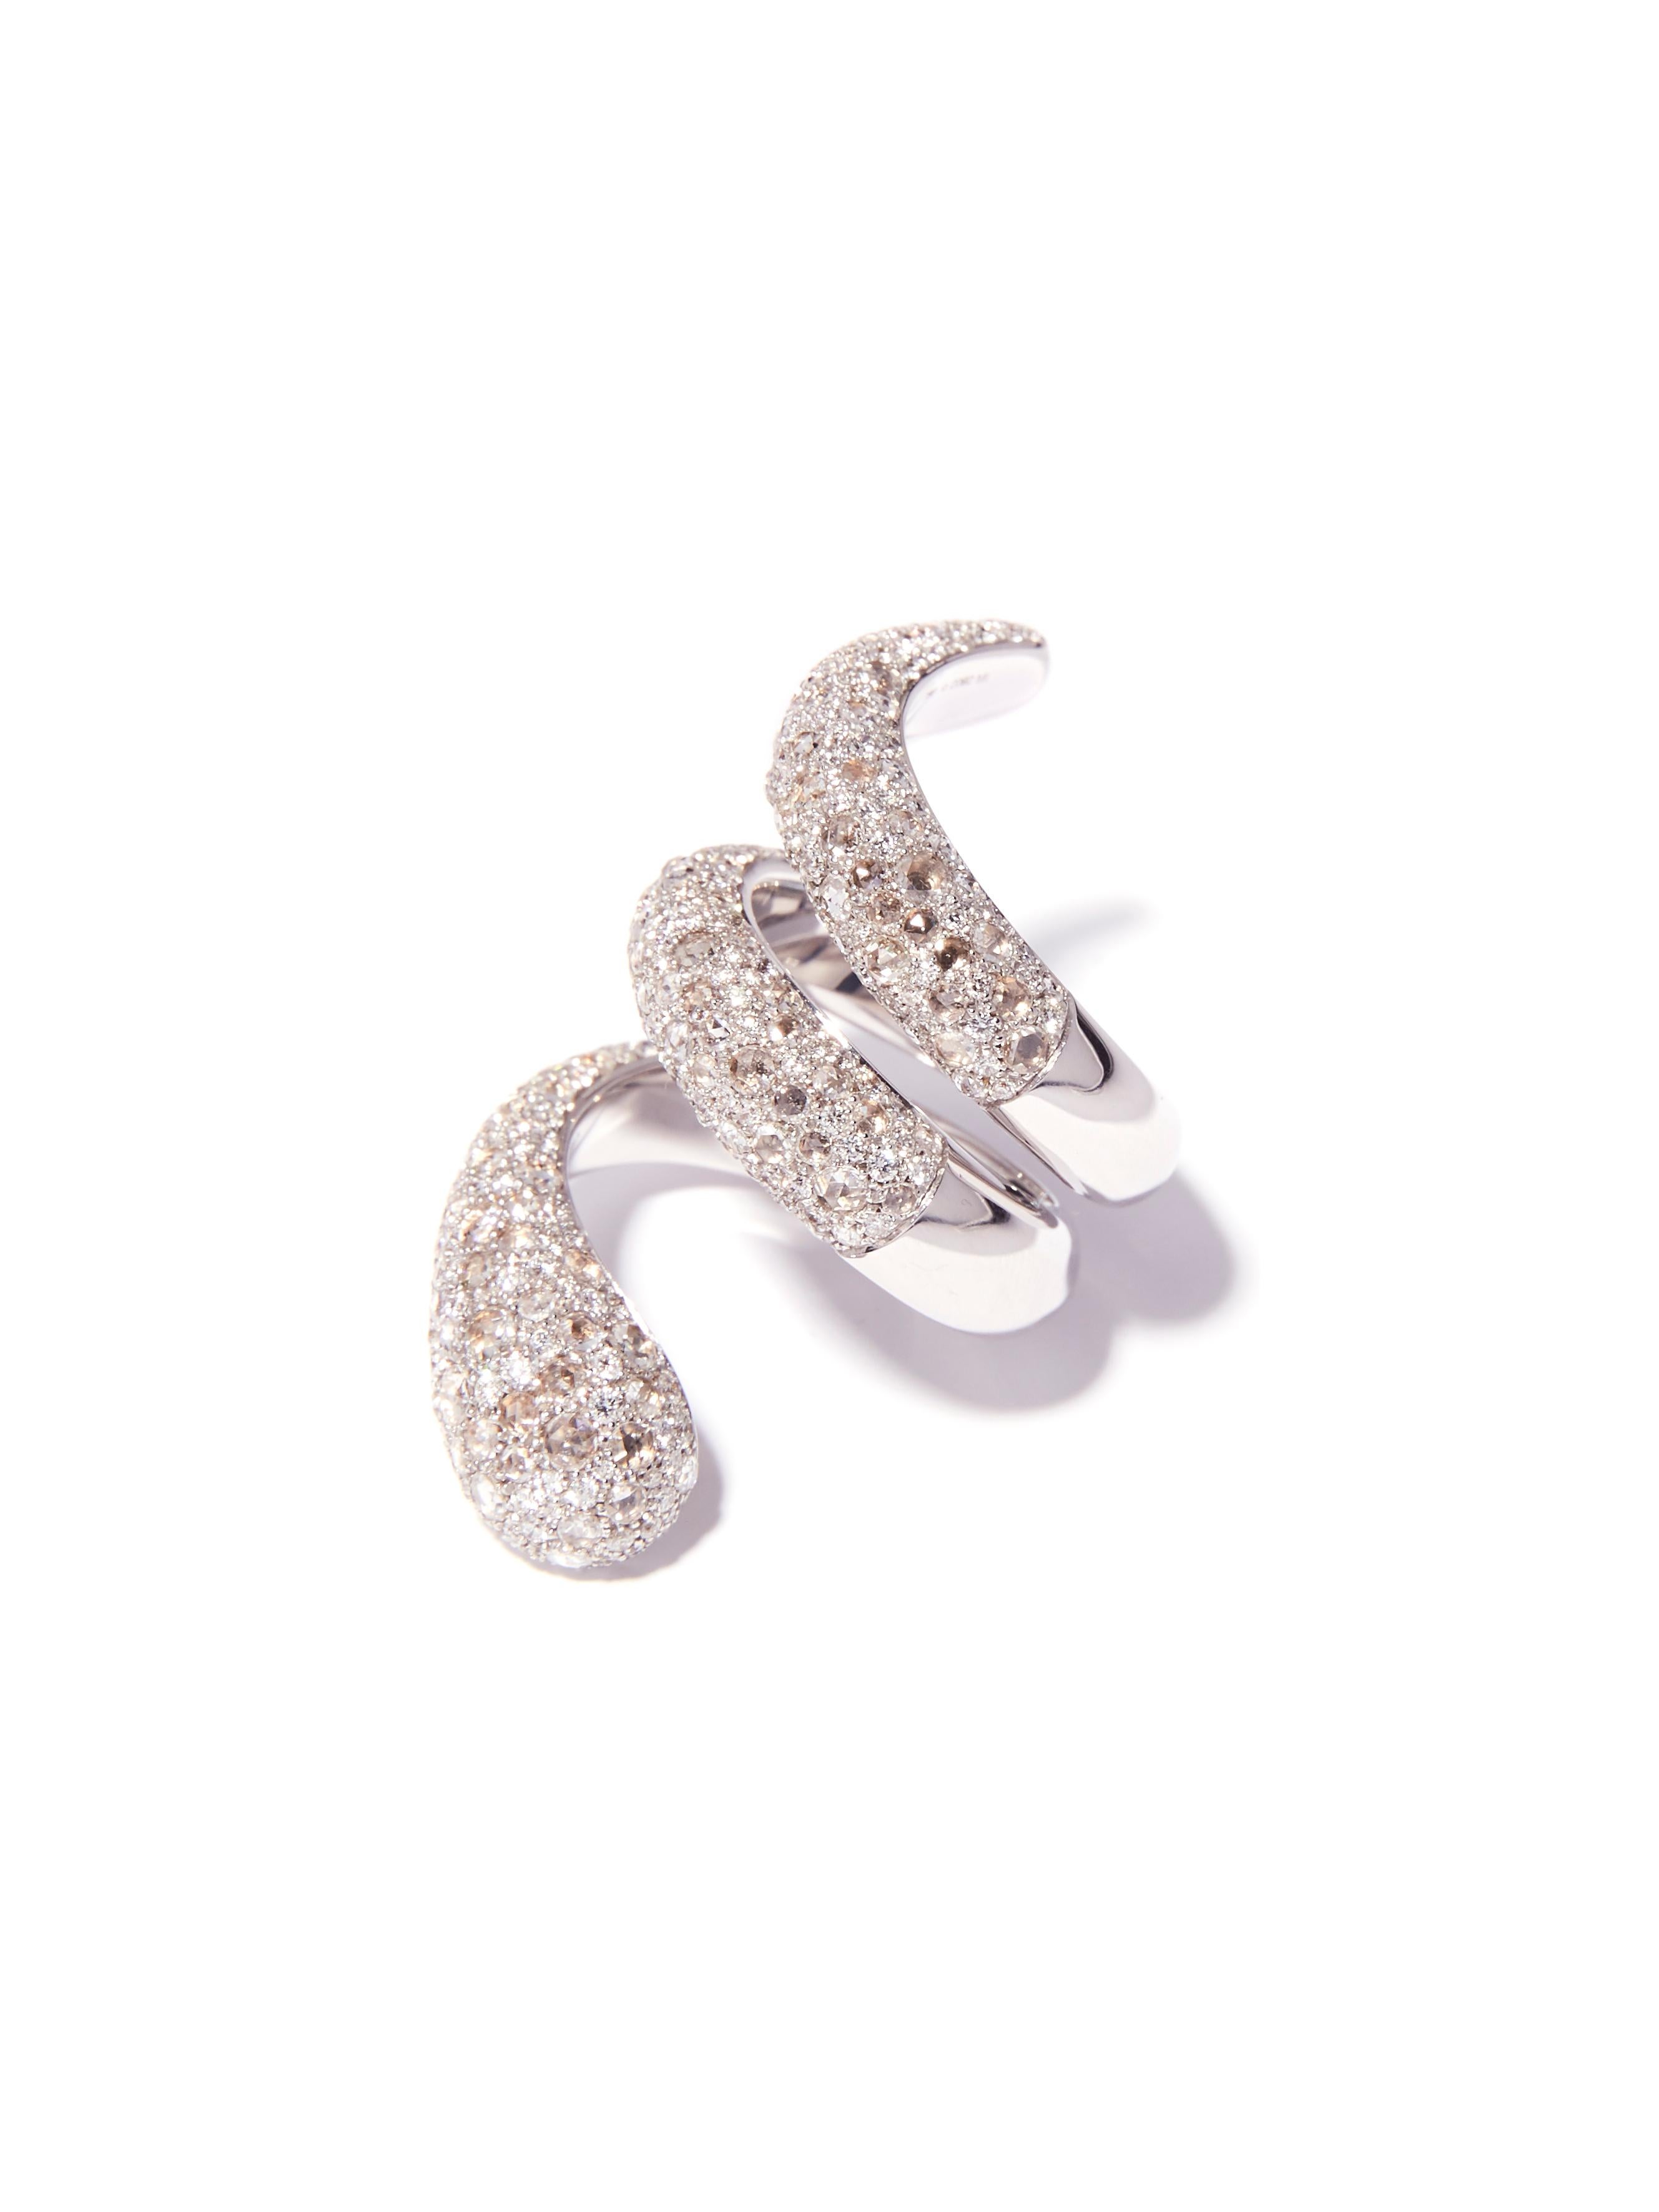 This exceptional ring is designed as a coiled snake. It is pave set with 2.72 carat rose cut diamonds and 1.98 carat brilliant cut diamonds resembling the pattern of snakeskin. A bold, yet comfortable design, this snake ring slithers up the finger